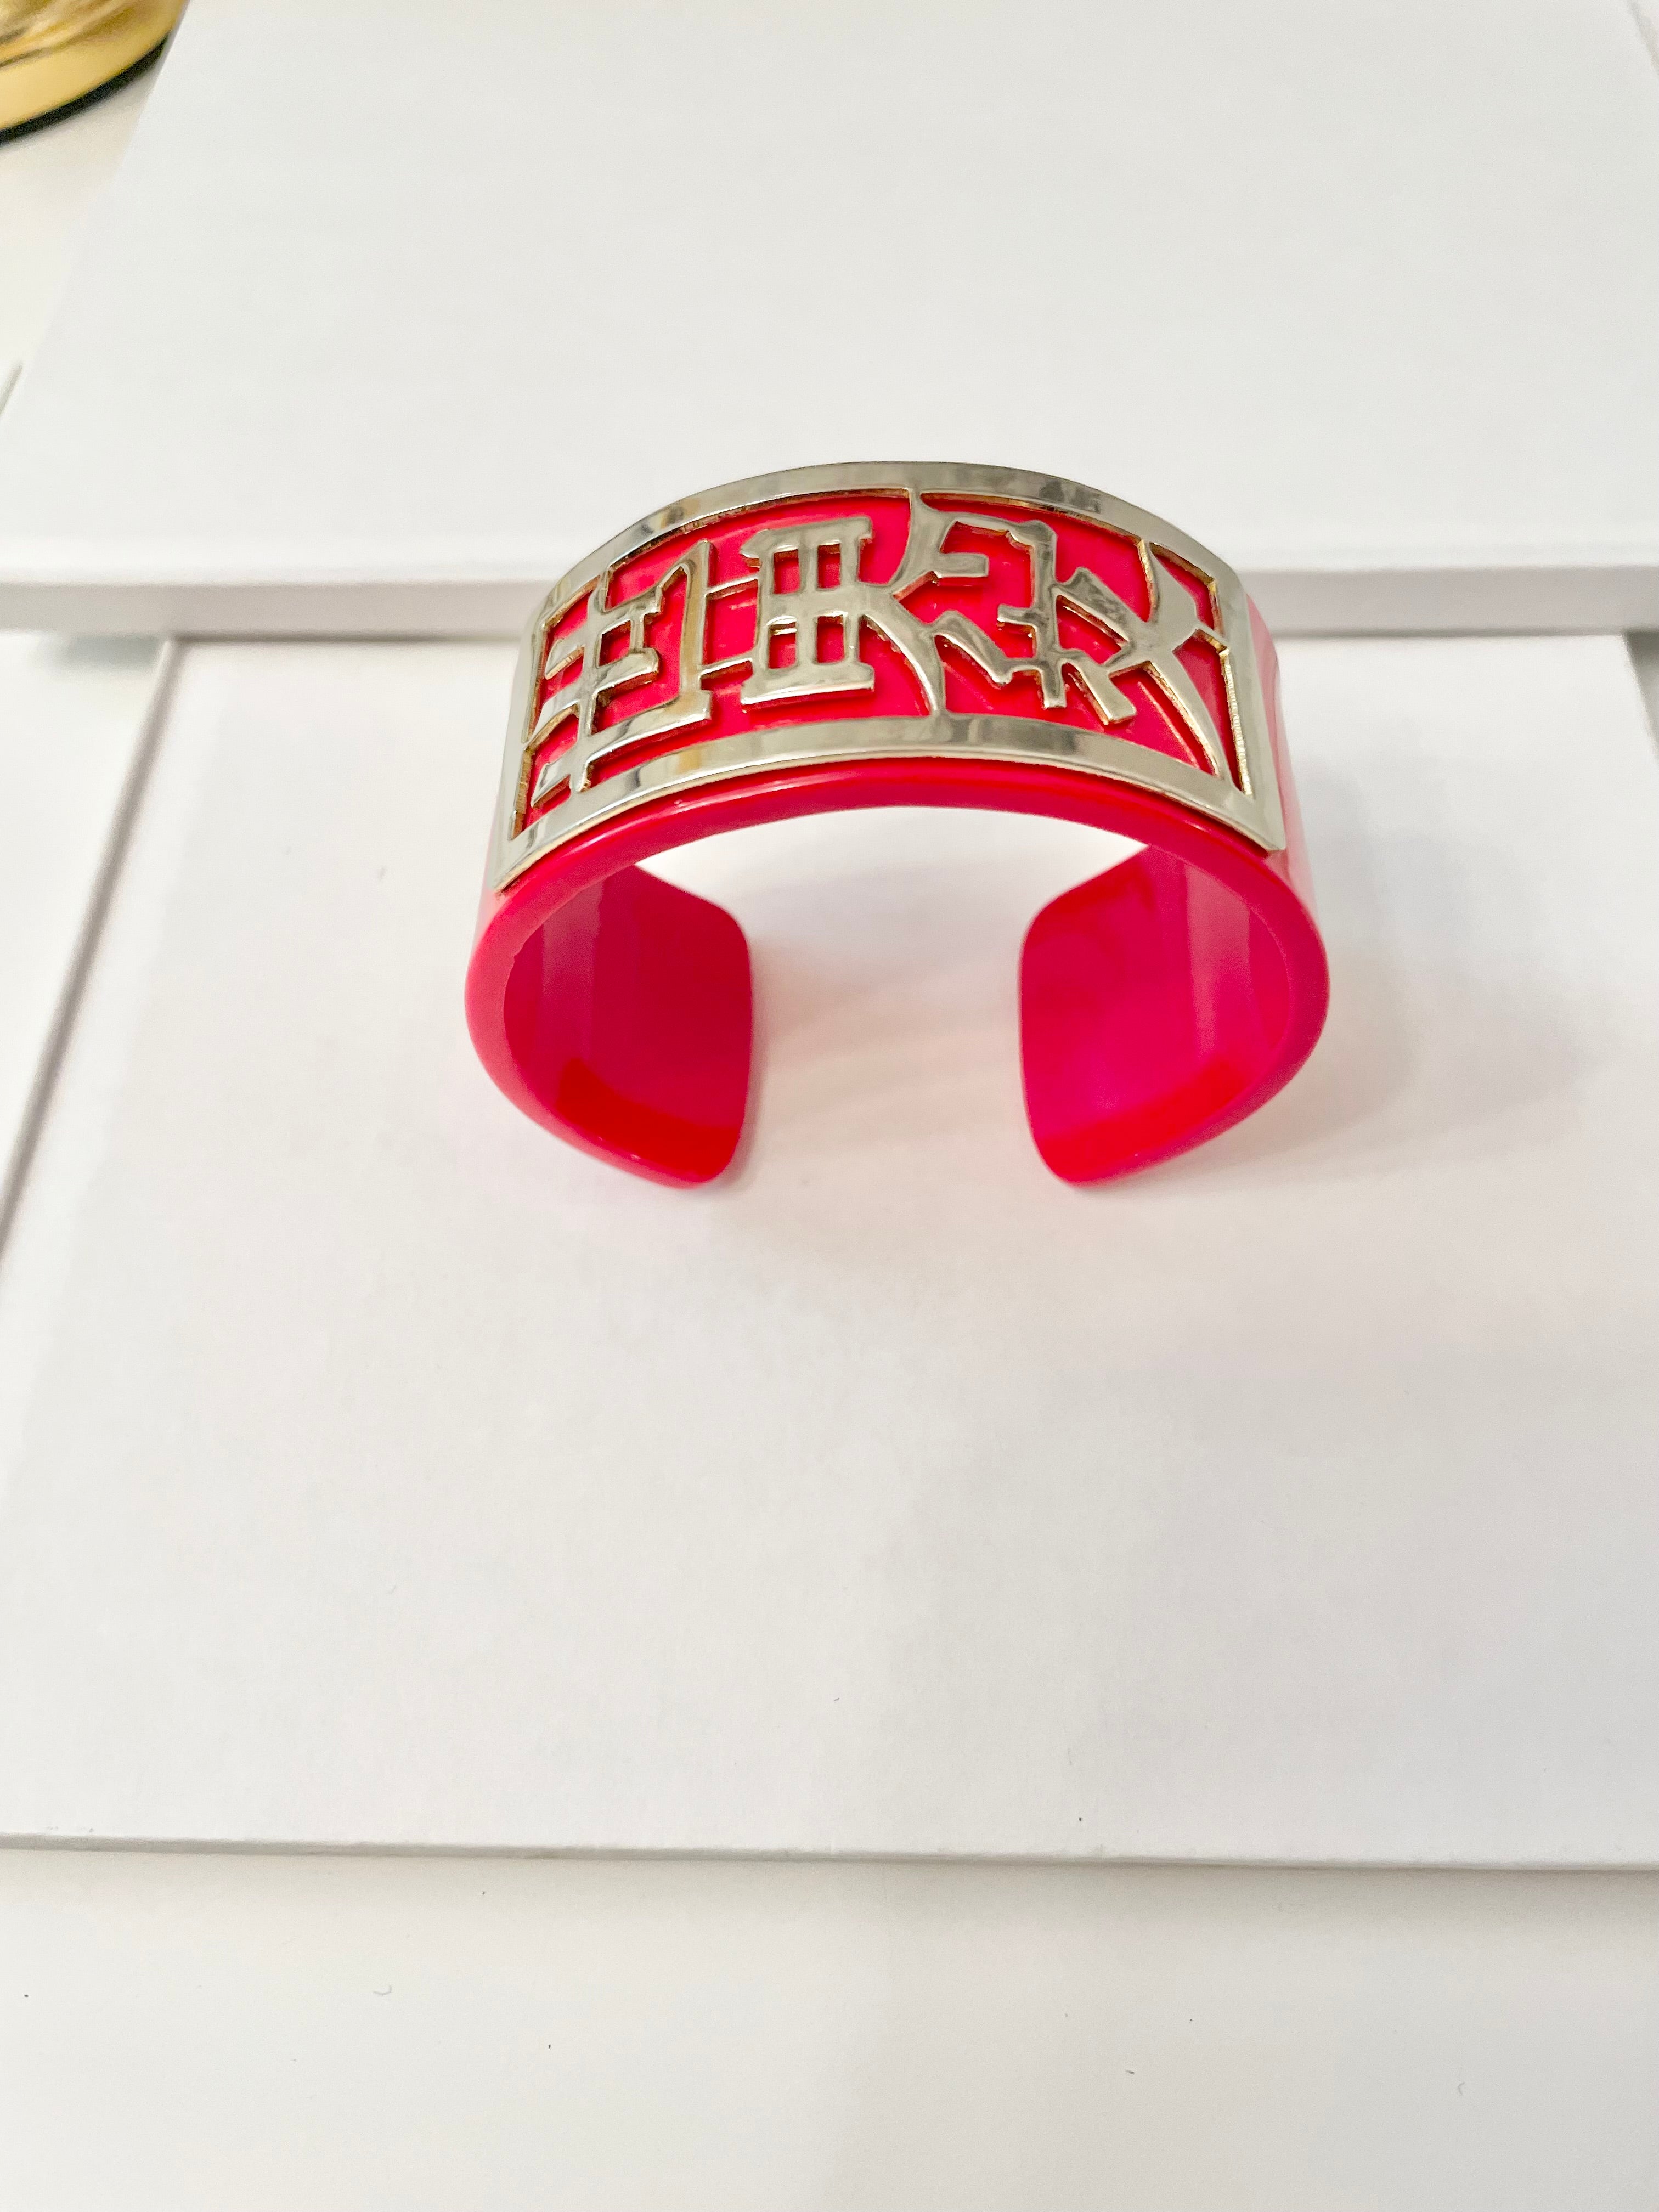 1960's Asian style, delightful crimson cuff bracelet.....The Cheeky Gal adores it!